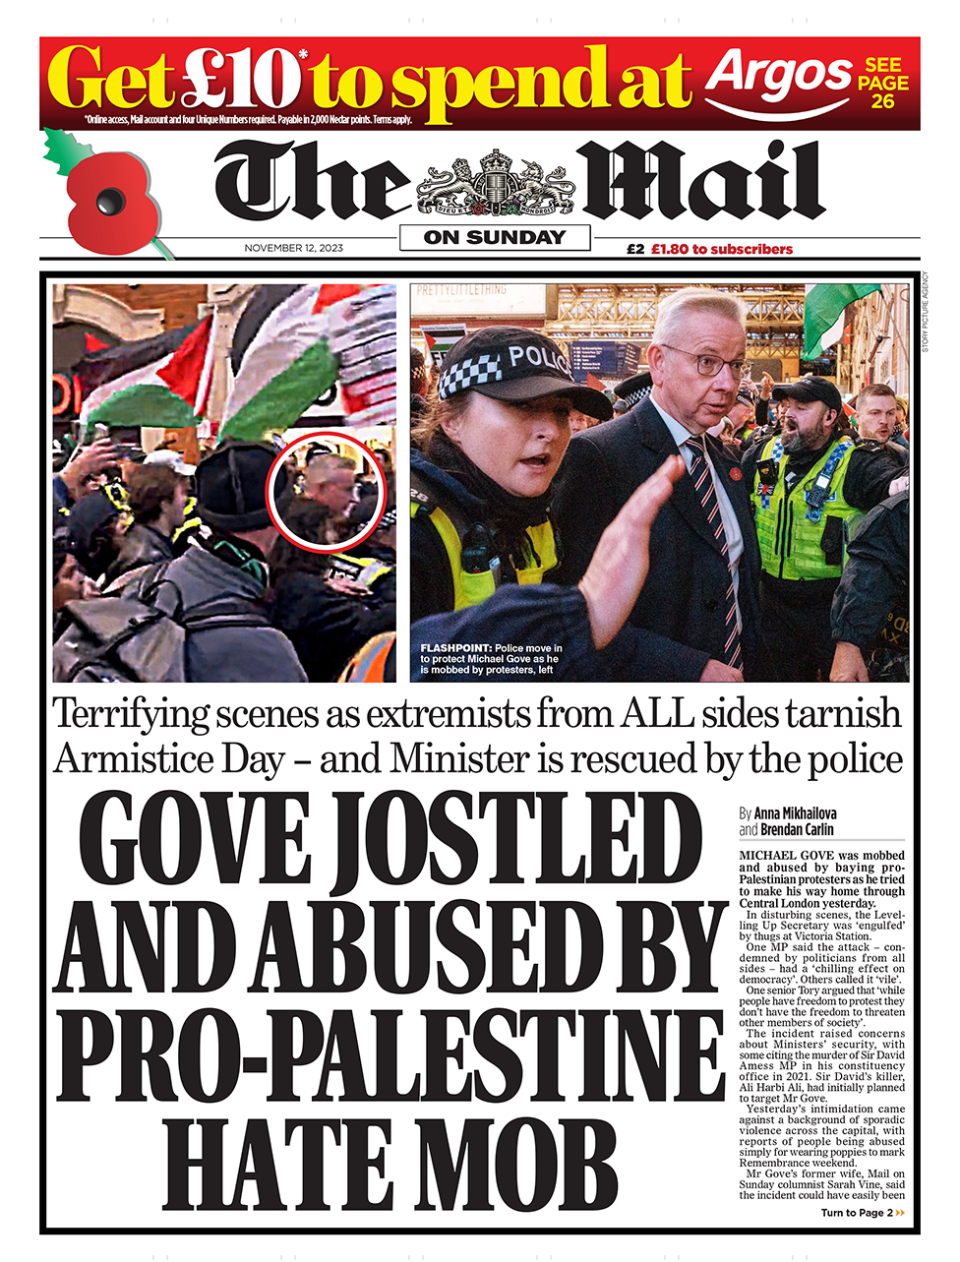 “Gove jostled and abused by pro-Palestine hate mob”, reads The Mail On Sunday.